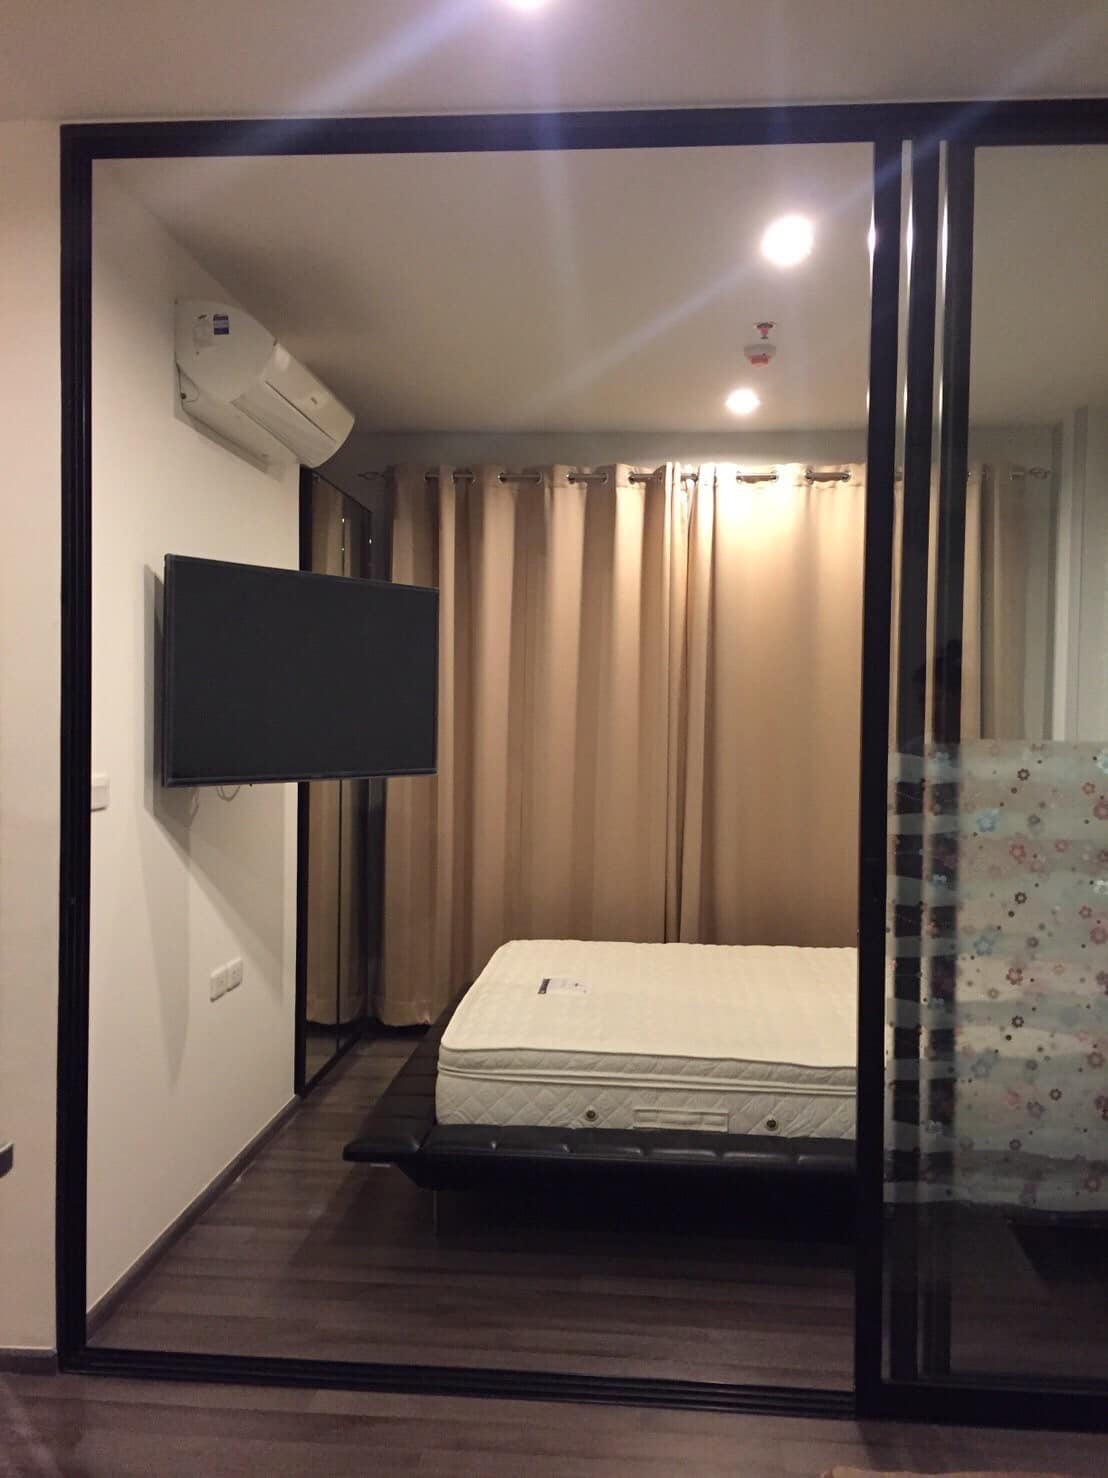 THE BASE PARK WEST / BTS ONNUT / HL / AVAILABLE CONDO ONNUT READY TO RENT AND SALE